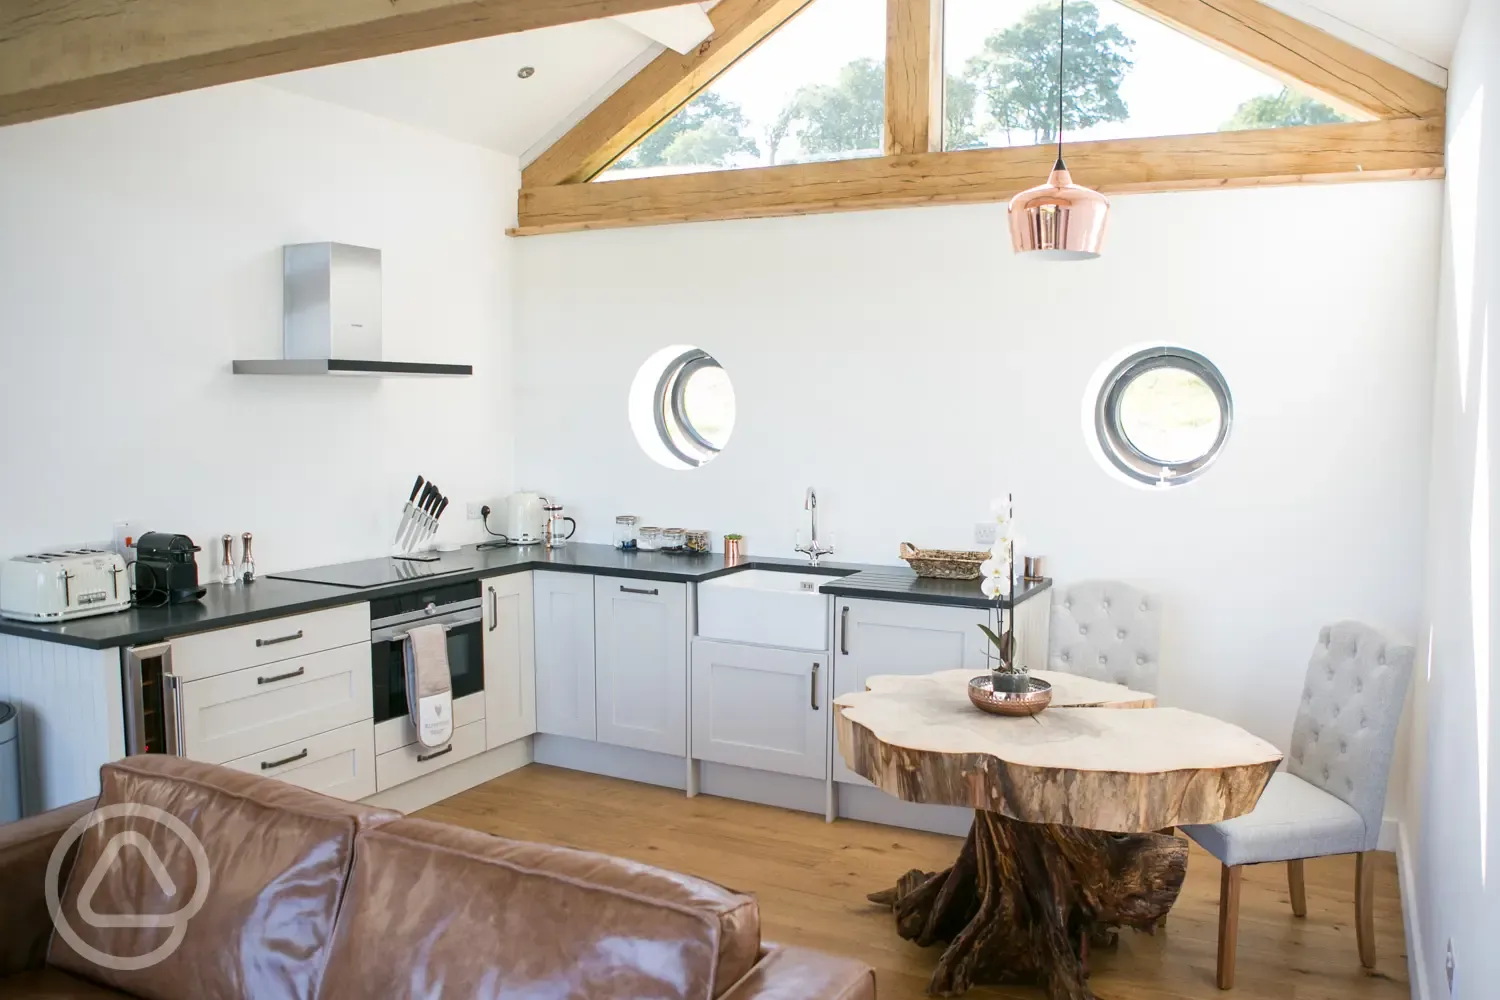 Kitchen in Heartwood Treehouse 